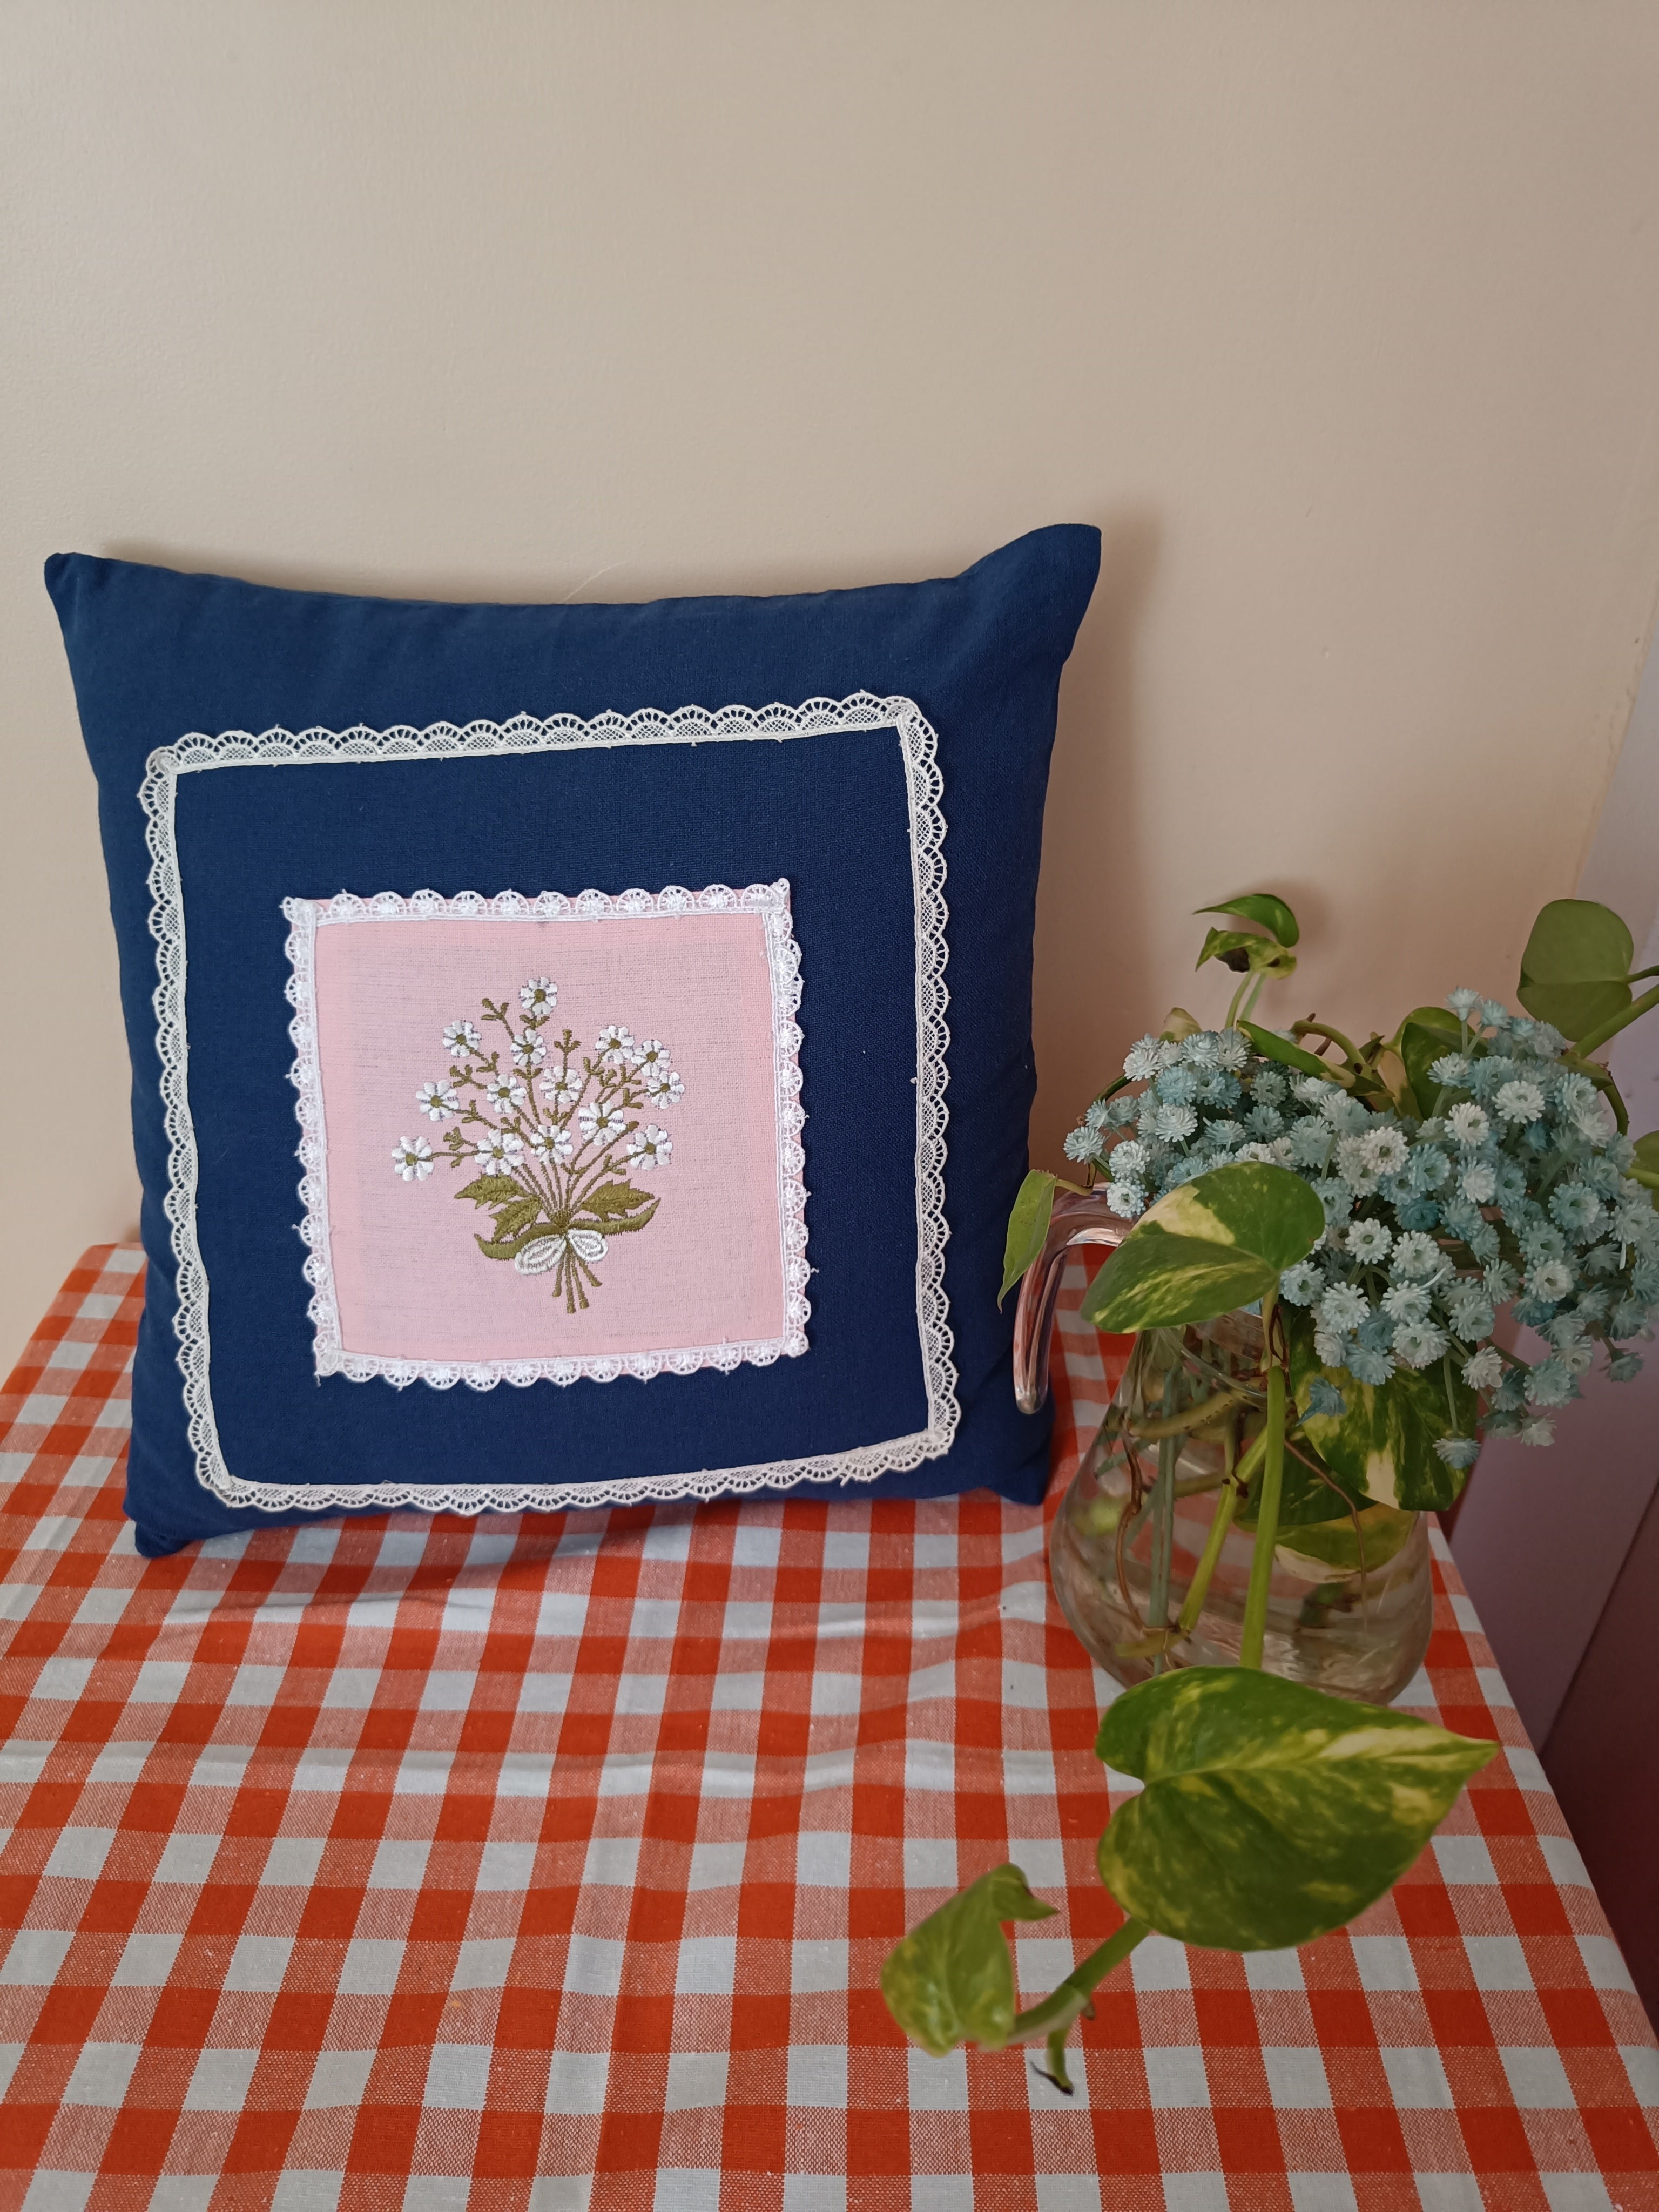 Set of 3: Navy Blue & Baby Pink Floral Embroidered Cushion covers with lace